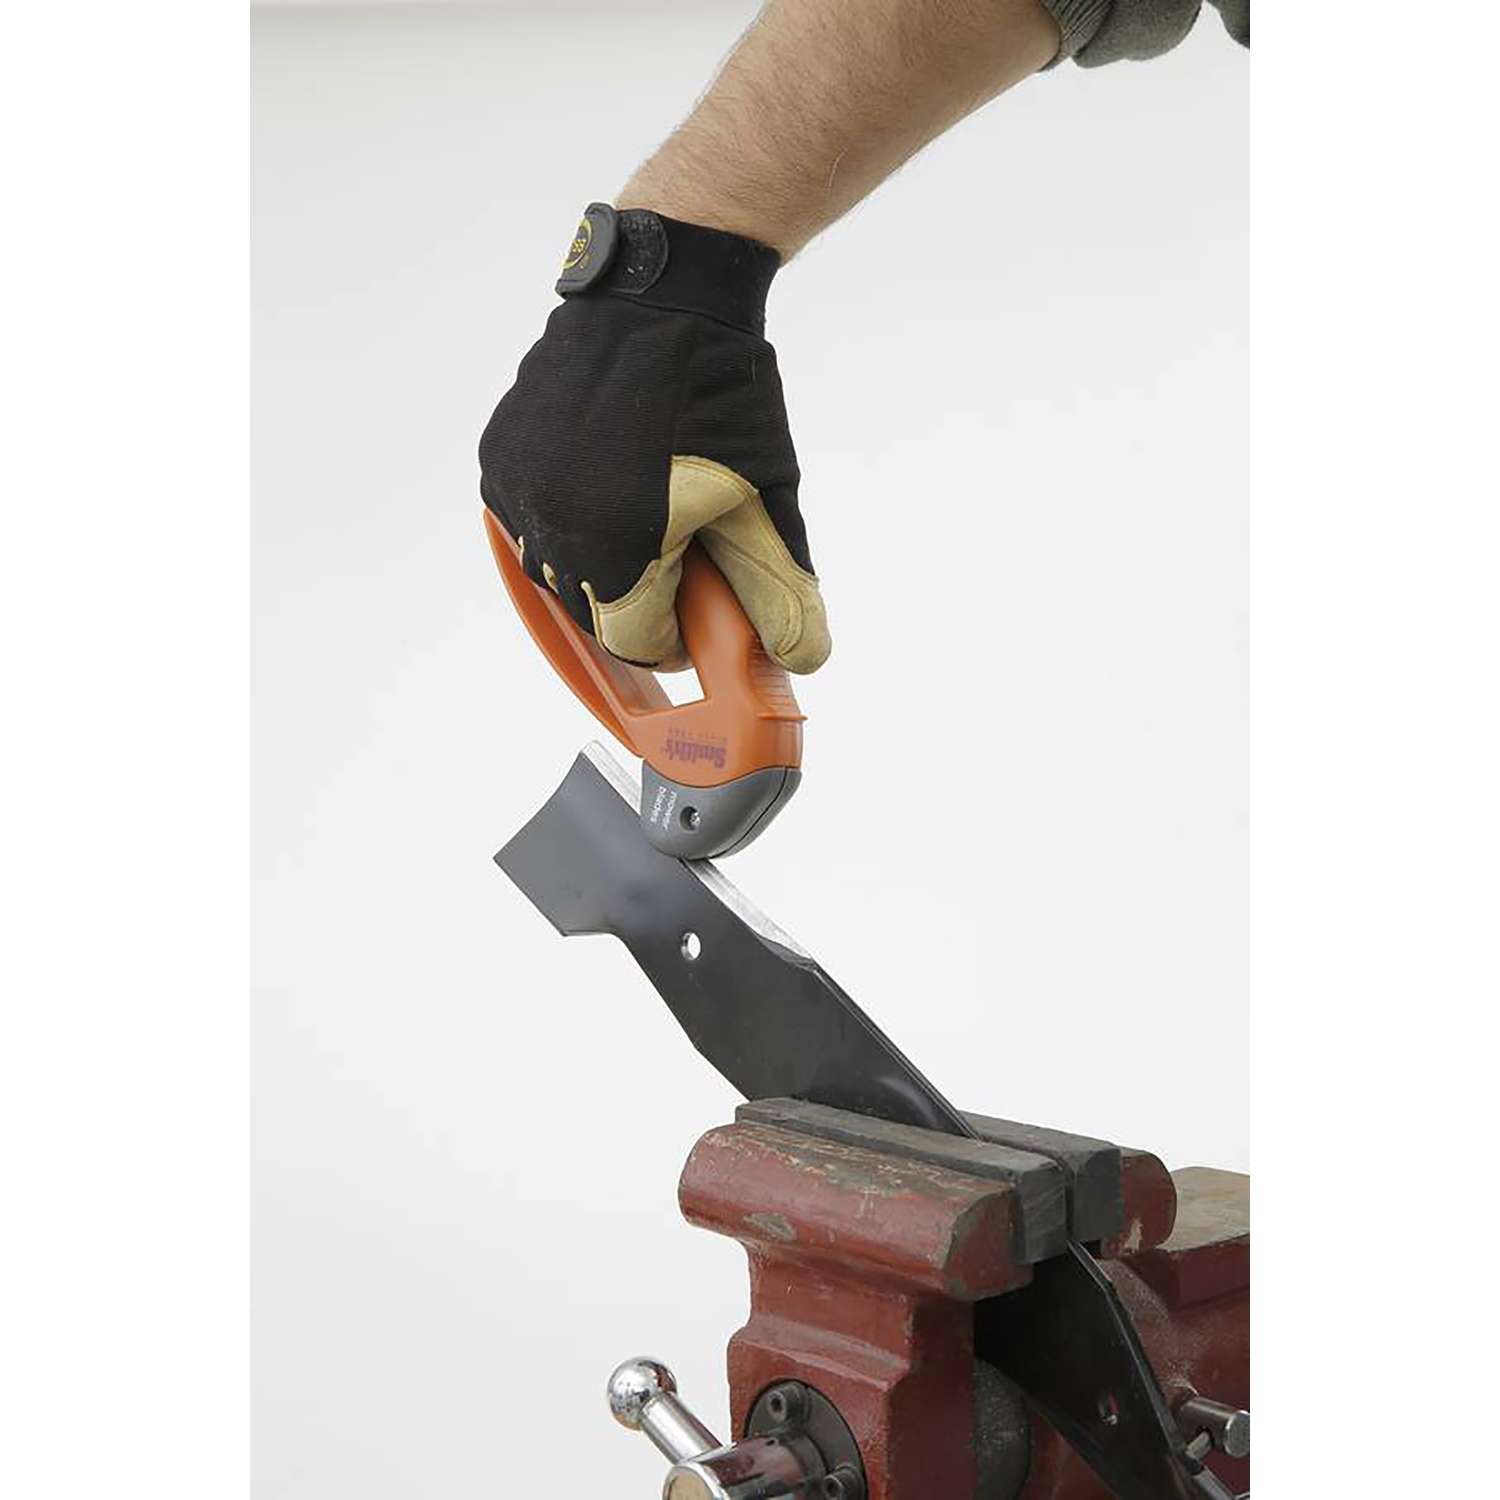 Smith's Consumer Products Store. MOWER BLADE SHARPENER